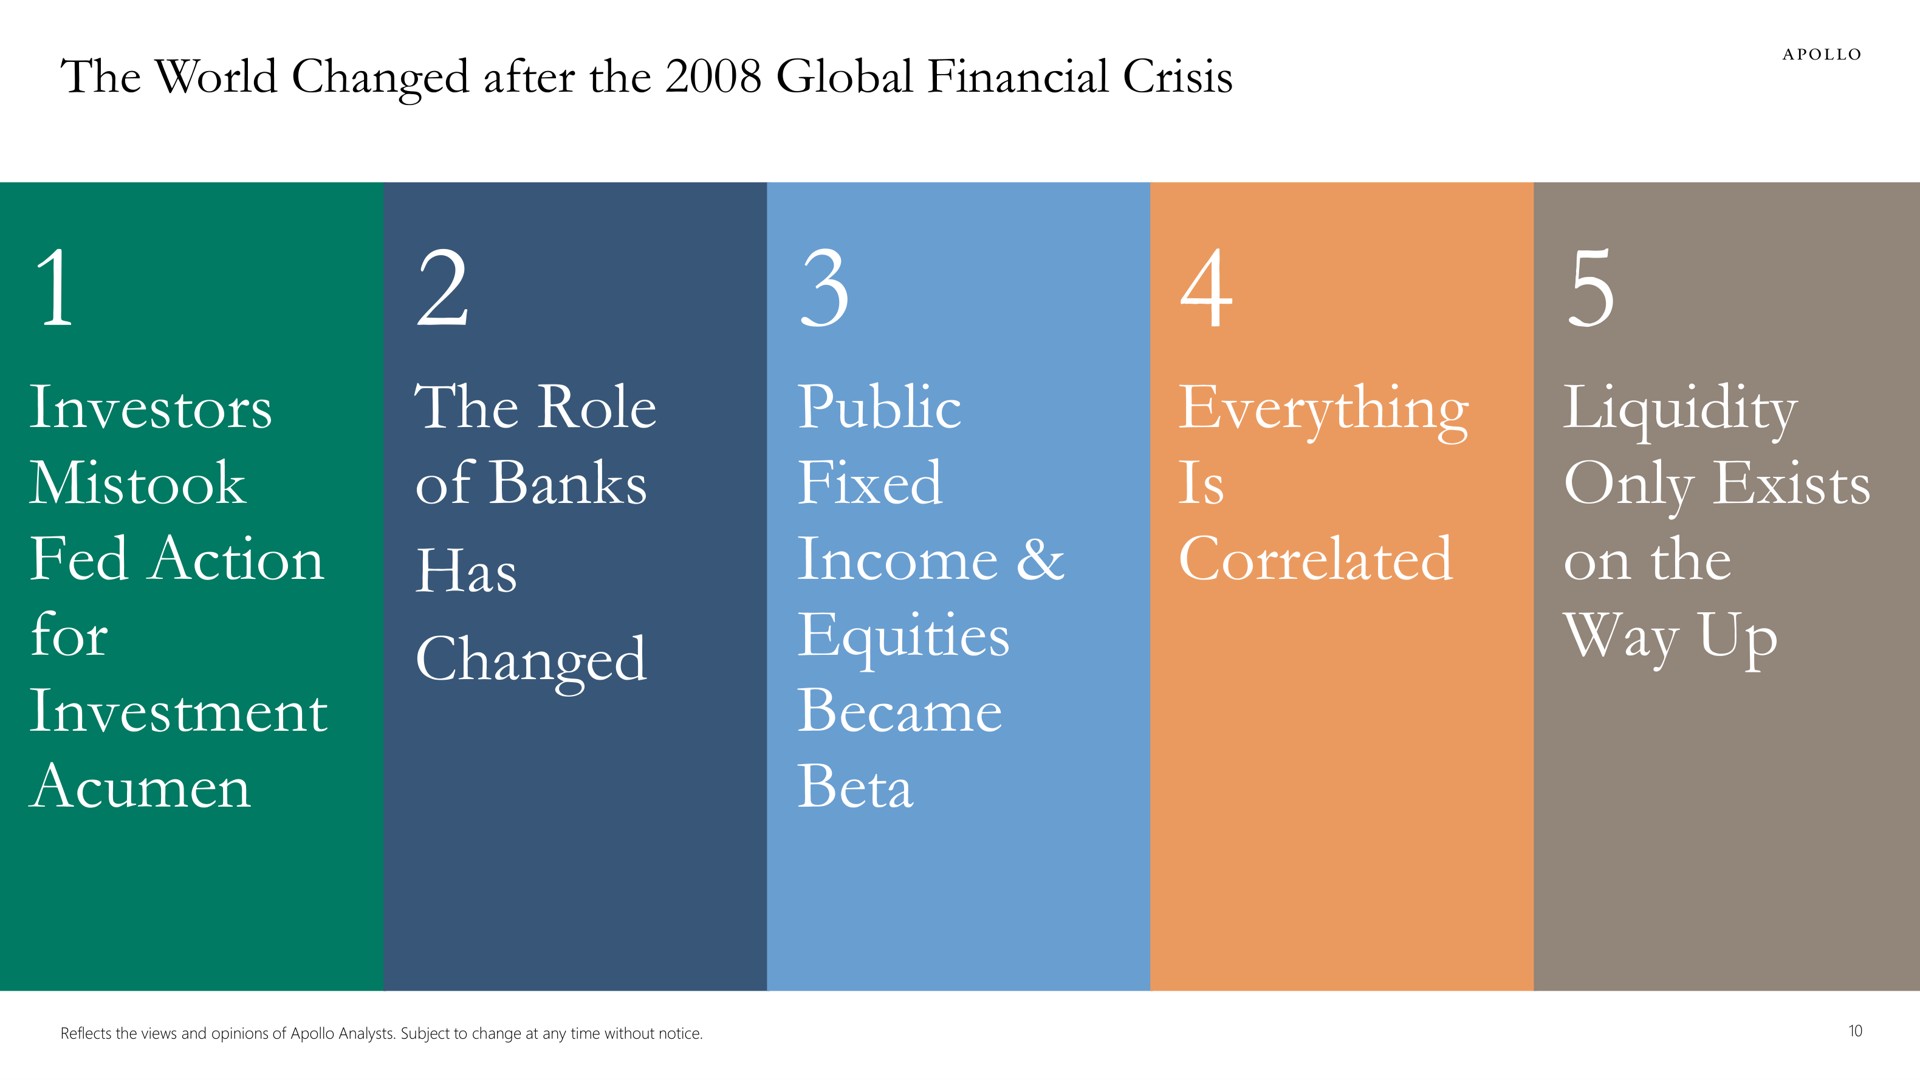 the world changed after the global financial crisis investors mistook fed action for investment acumen the role of banks has changed public fixed income equities became beta everything is correlated liquidity only exists on the way up tole | Apollo Global Management